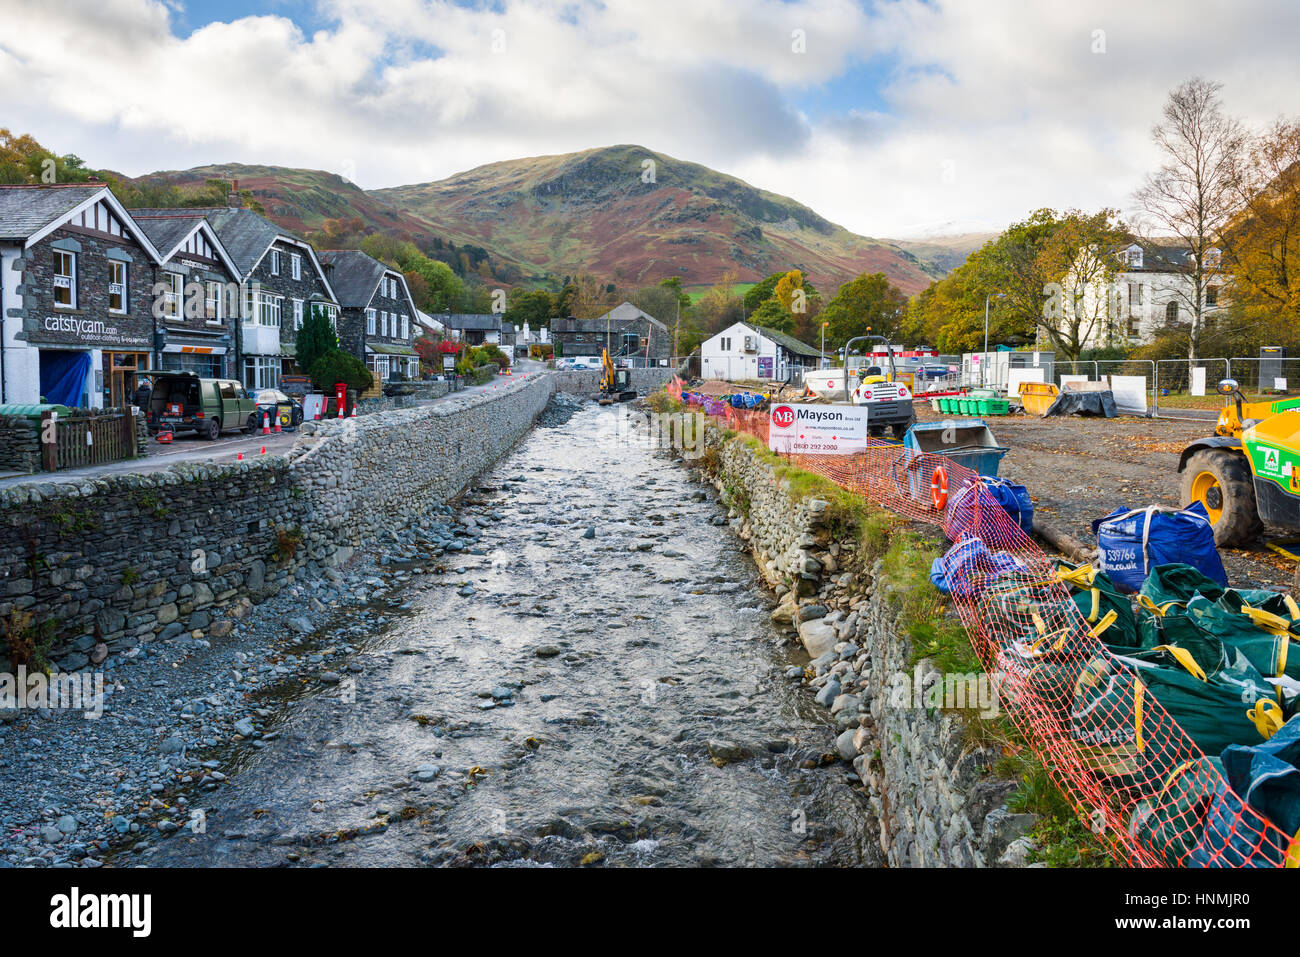 Repairs being made to flood damage at Glenridding after the 2015 storm Desmond. Lake District National Park, Cumbria, England. Stock Photo